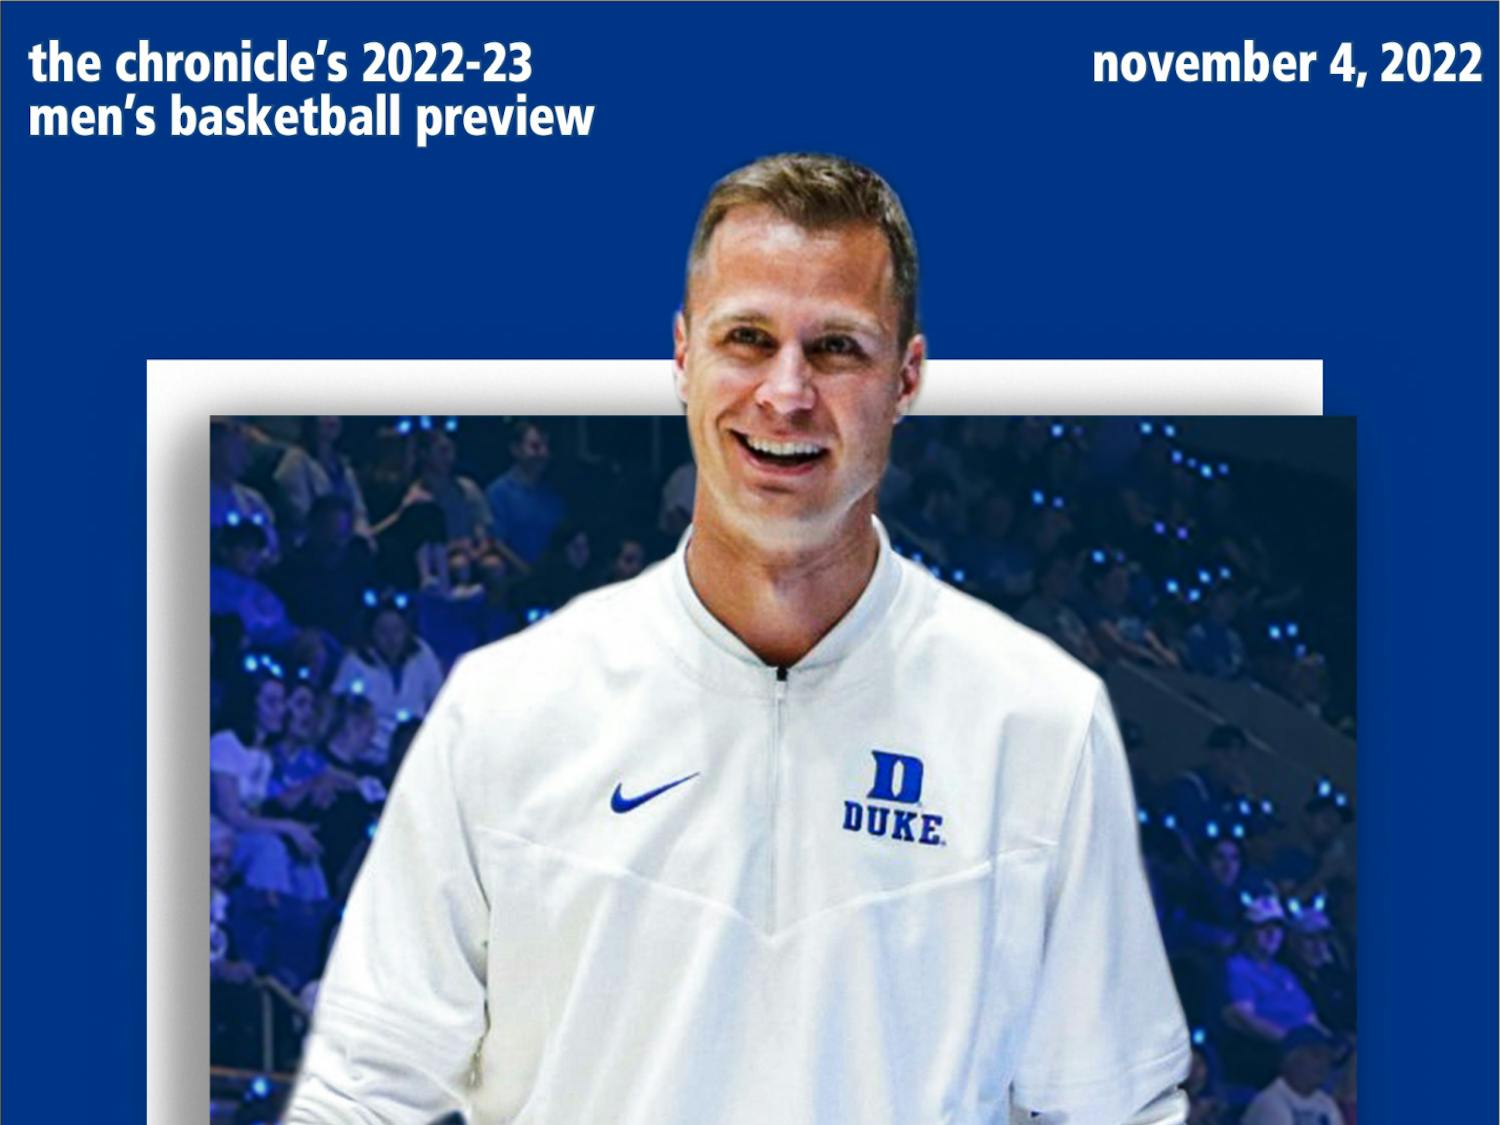 Duke's season is here. The Chronicle's season preview is here to prepare you for every second of it.